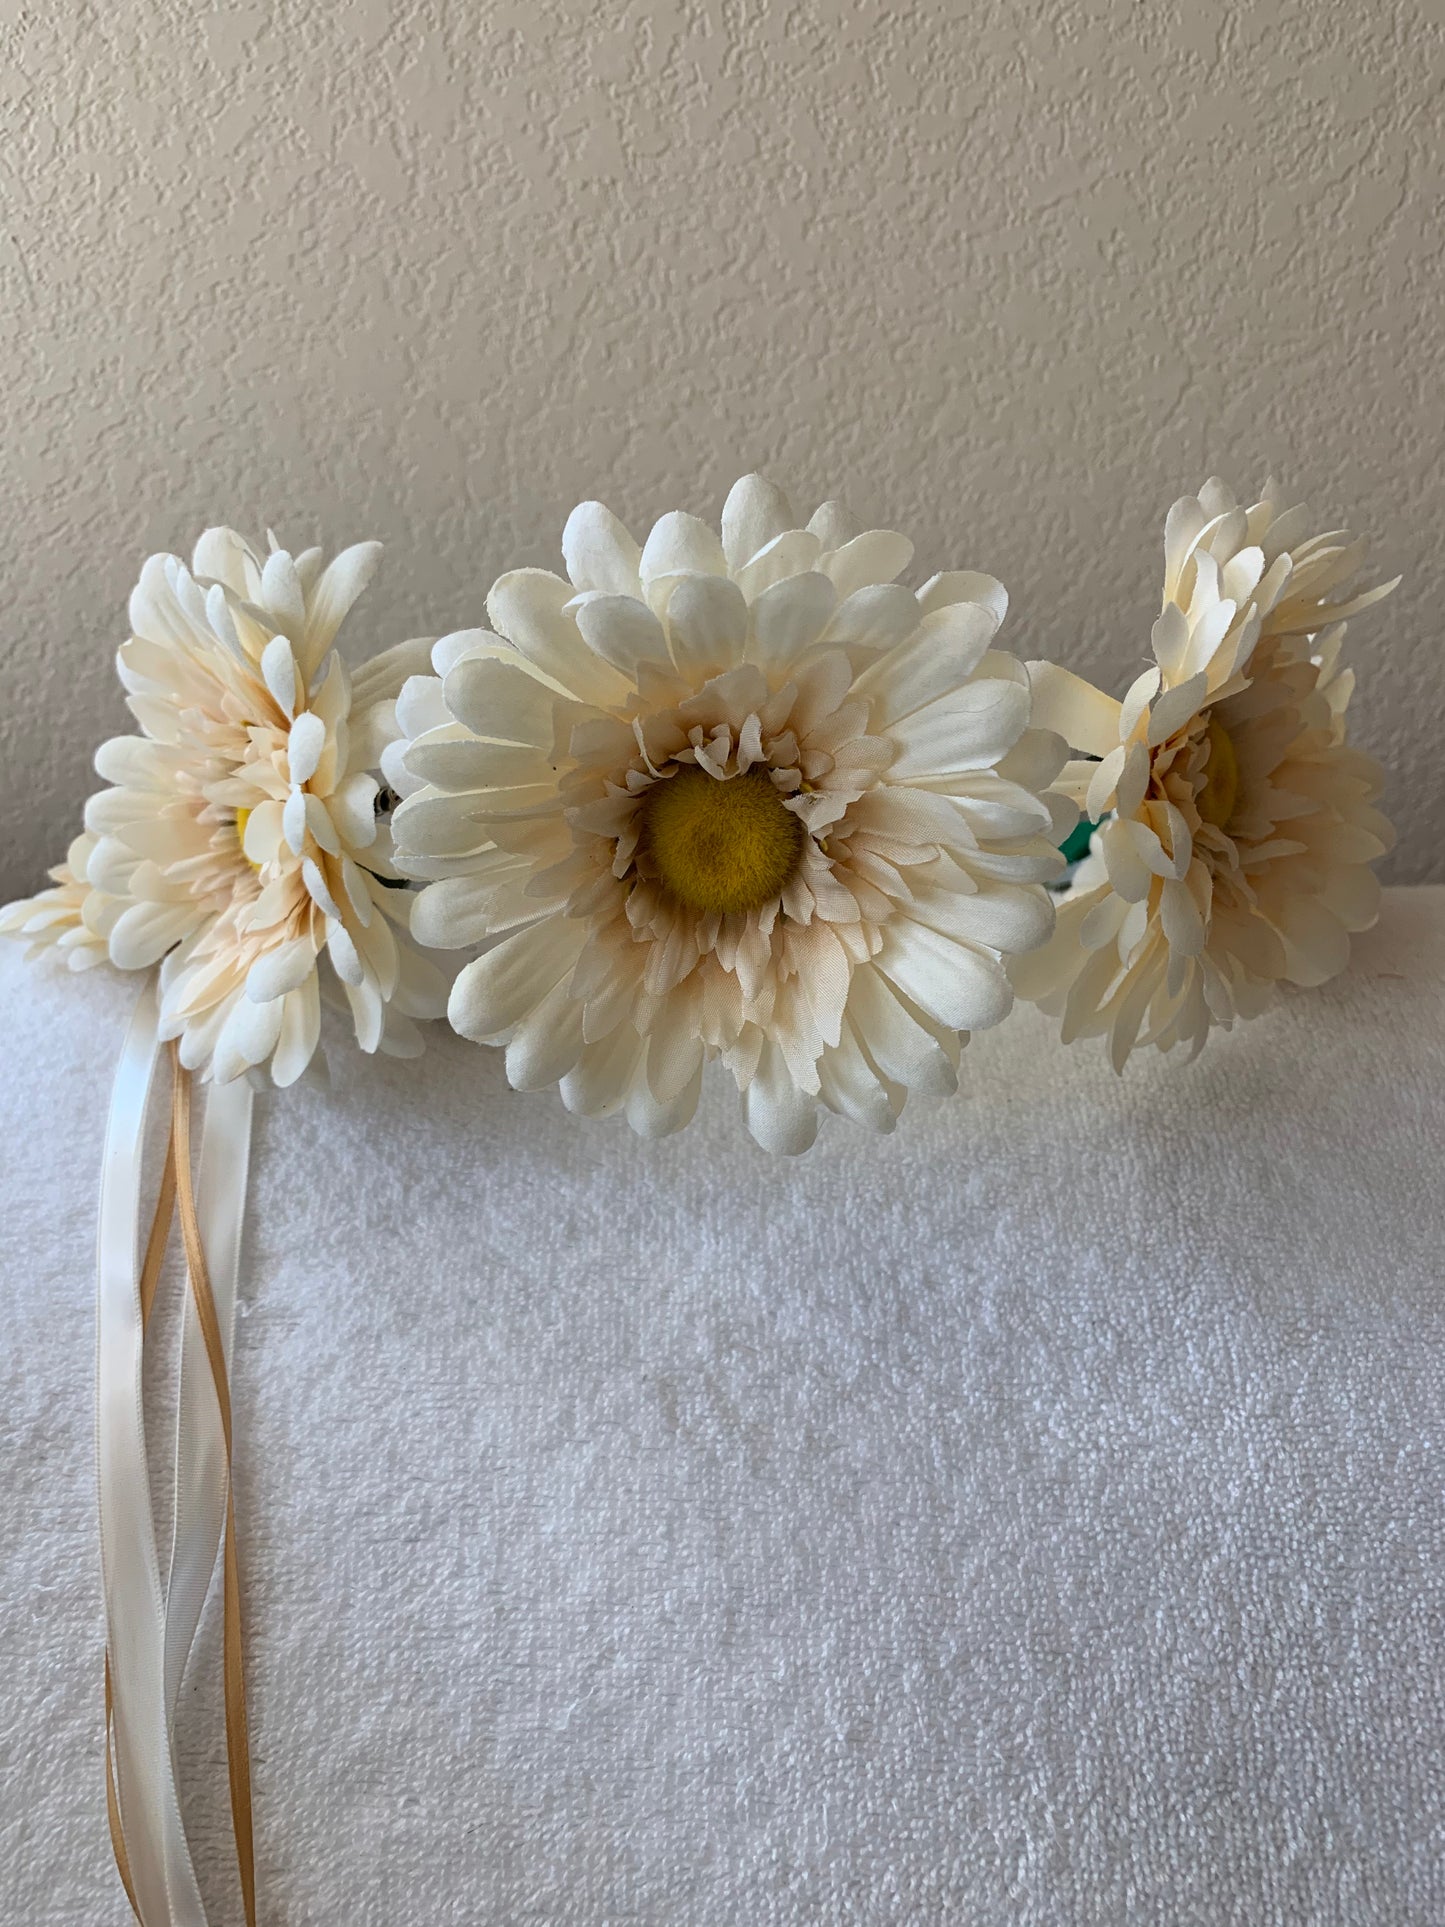 Large Wreath Lighted - All Beige Daisies with Yellow Centers